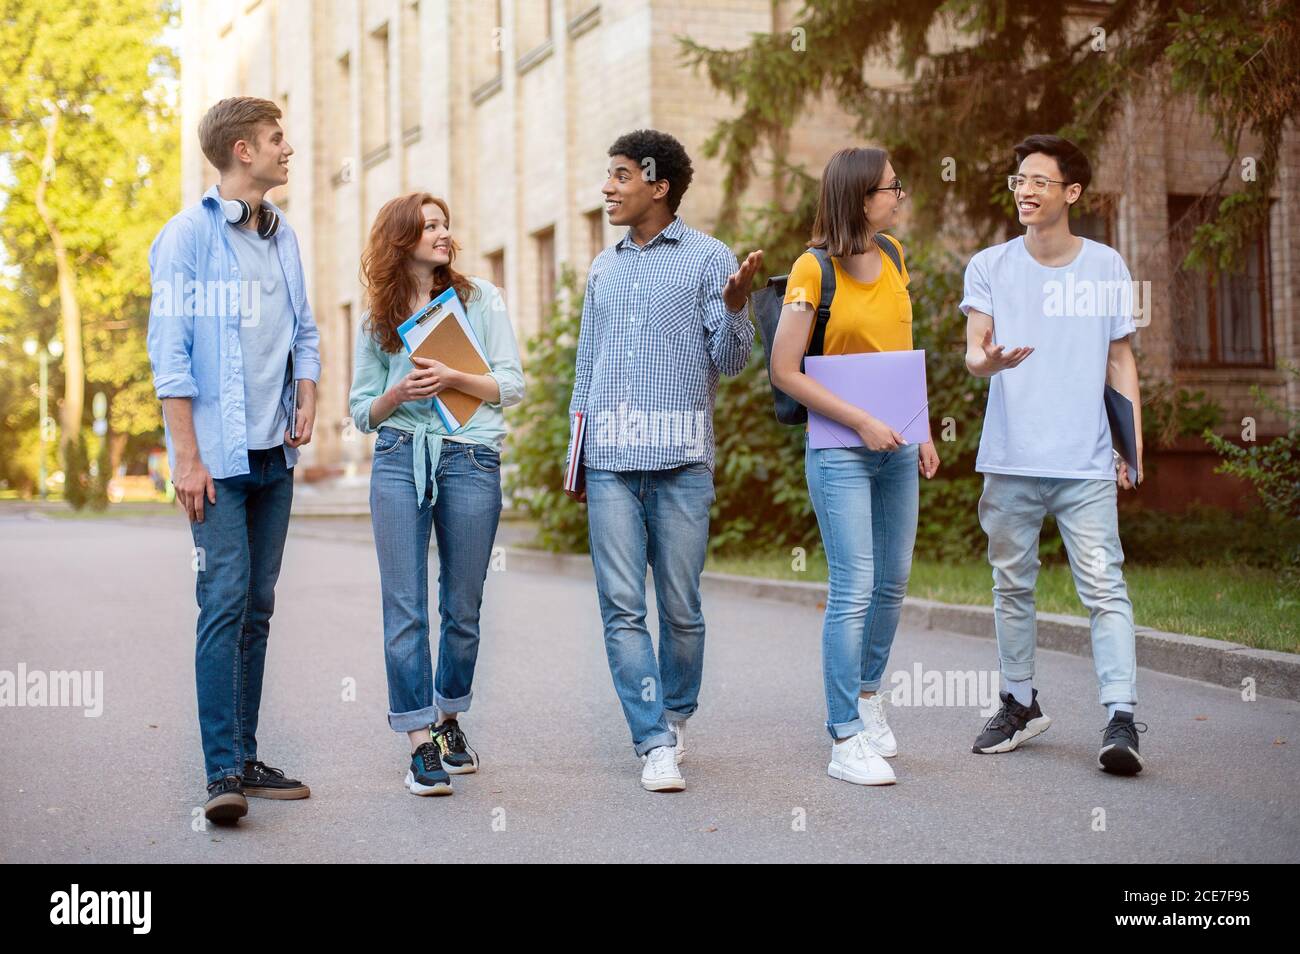 Group Of Multicultural First-Year Students Walking Near University Building Outside Stock Photo